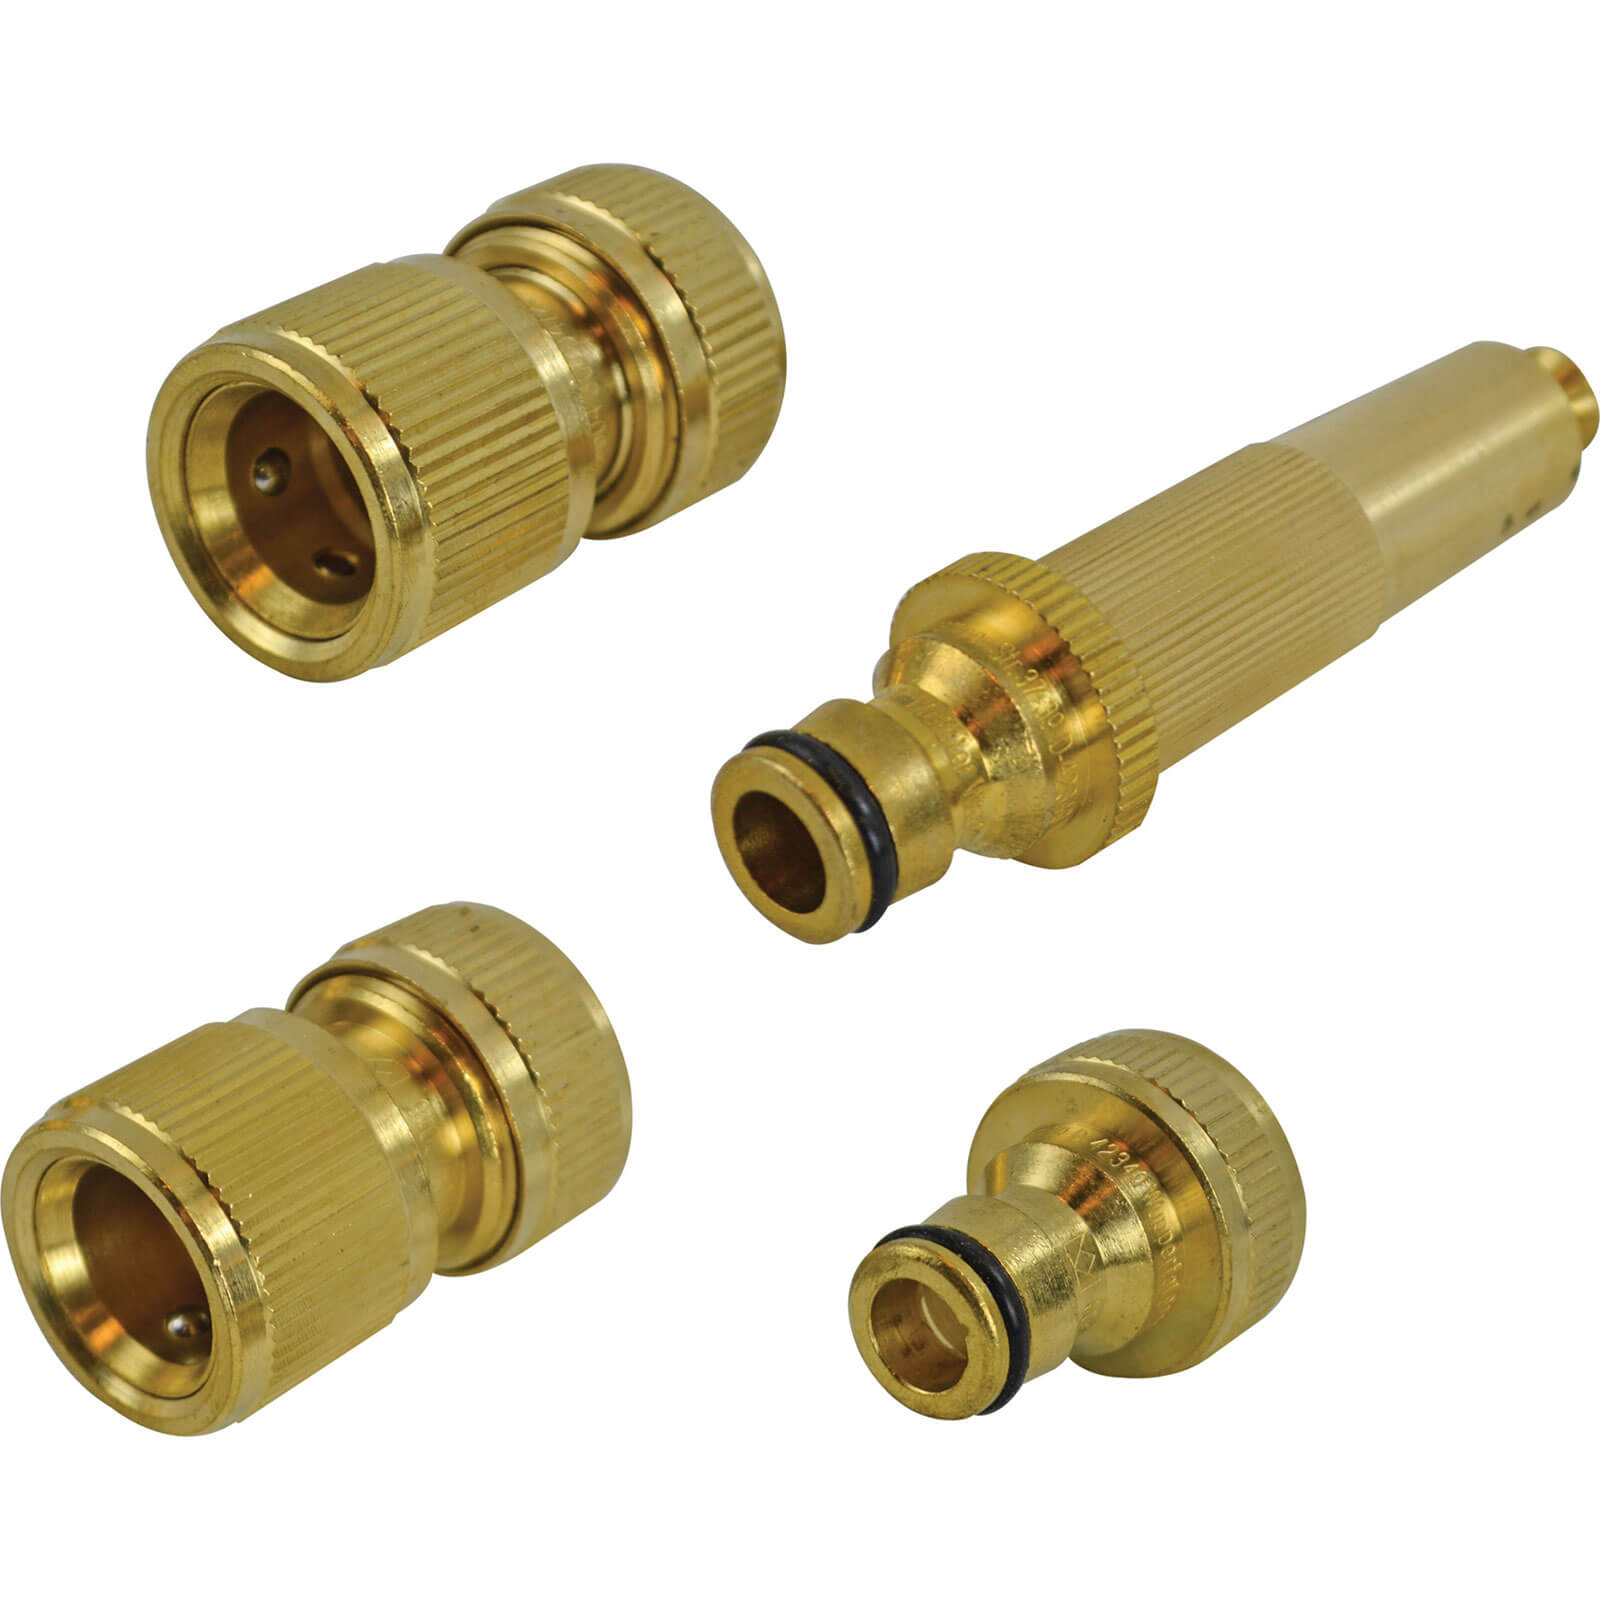 Image of Faithfull Brass Garden Nozzle and Fittings Kit 4 Piece